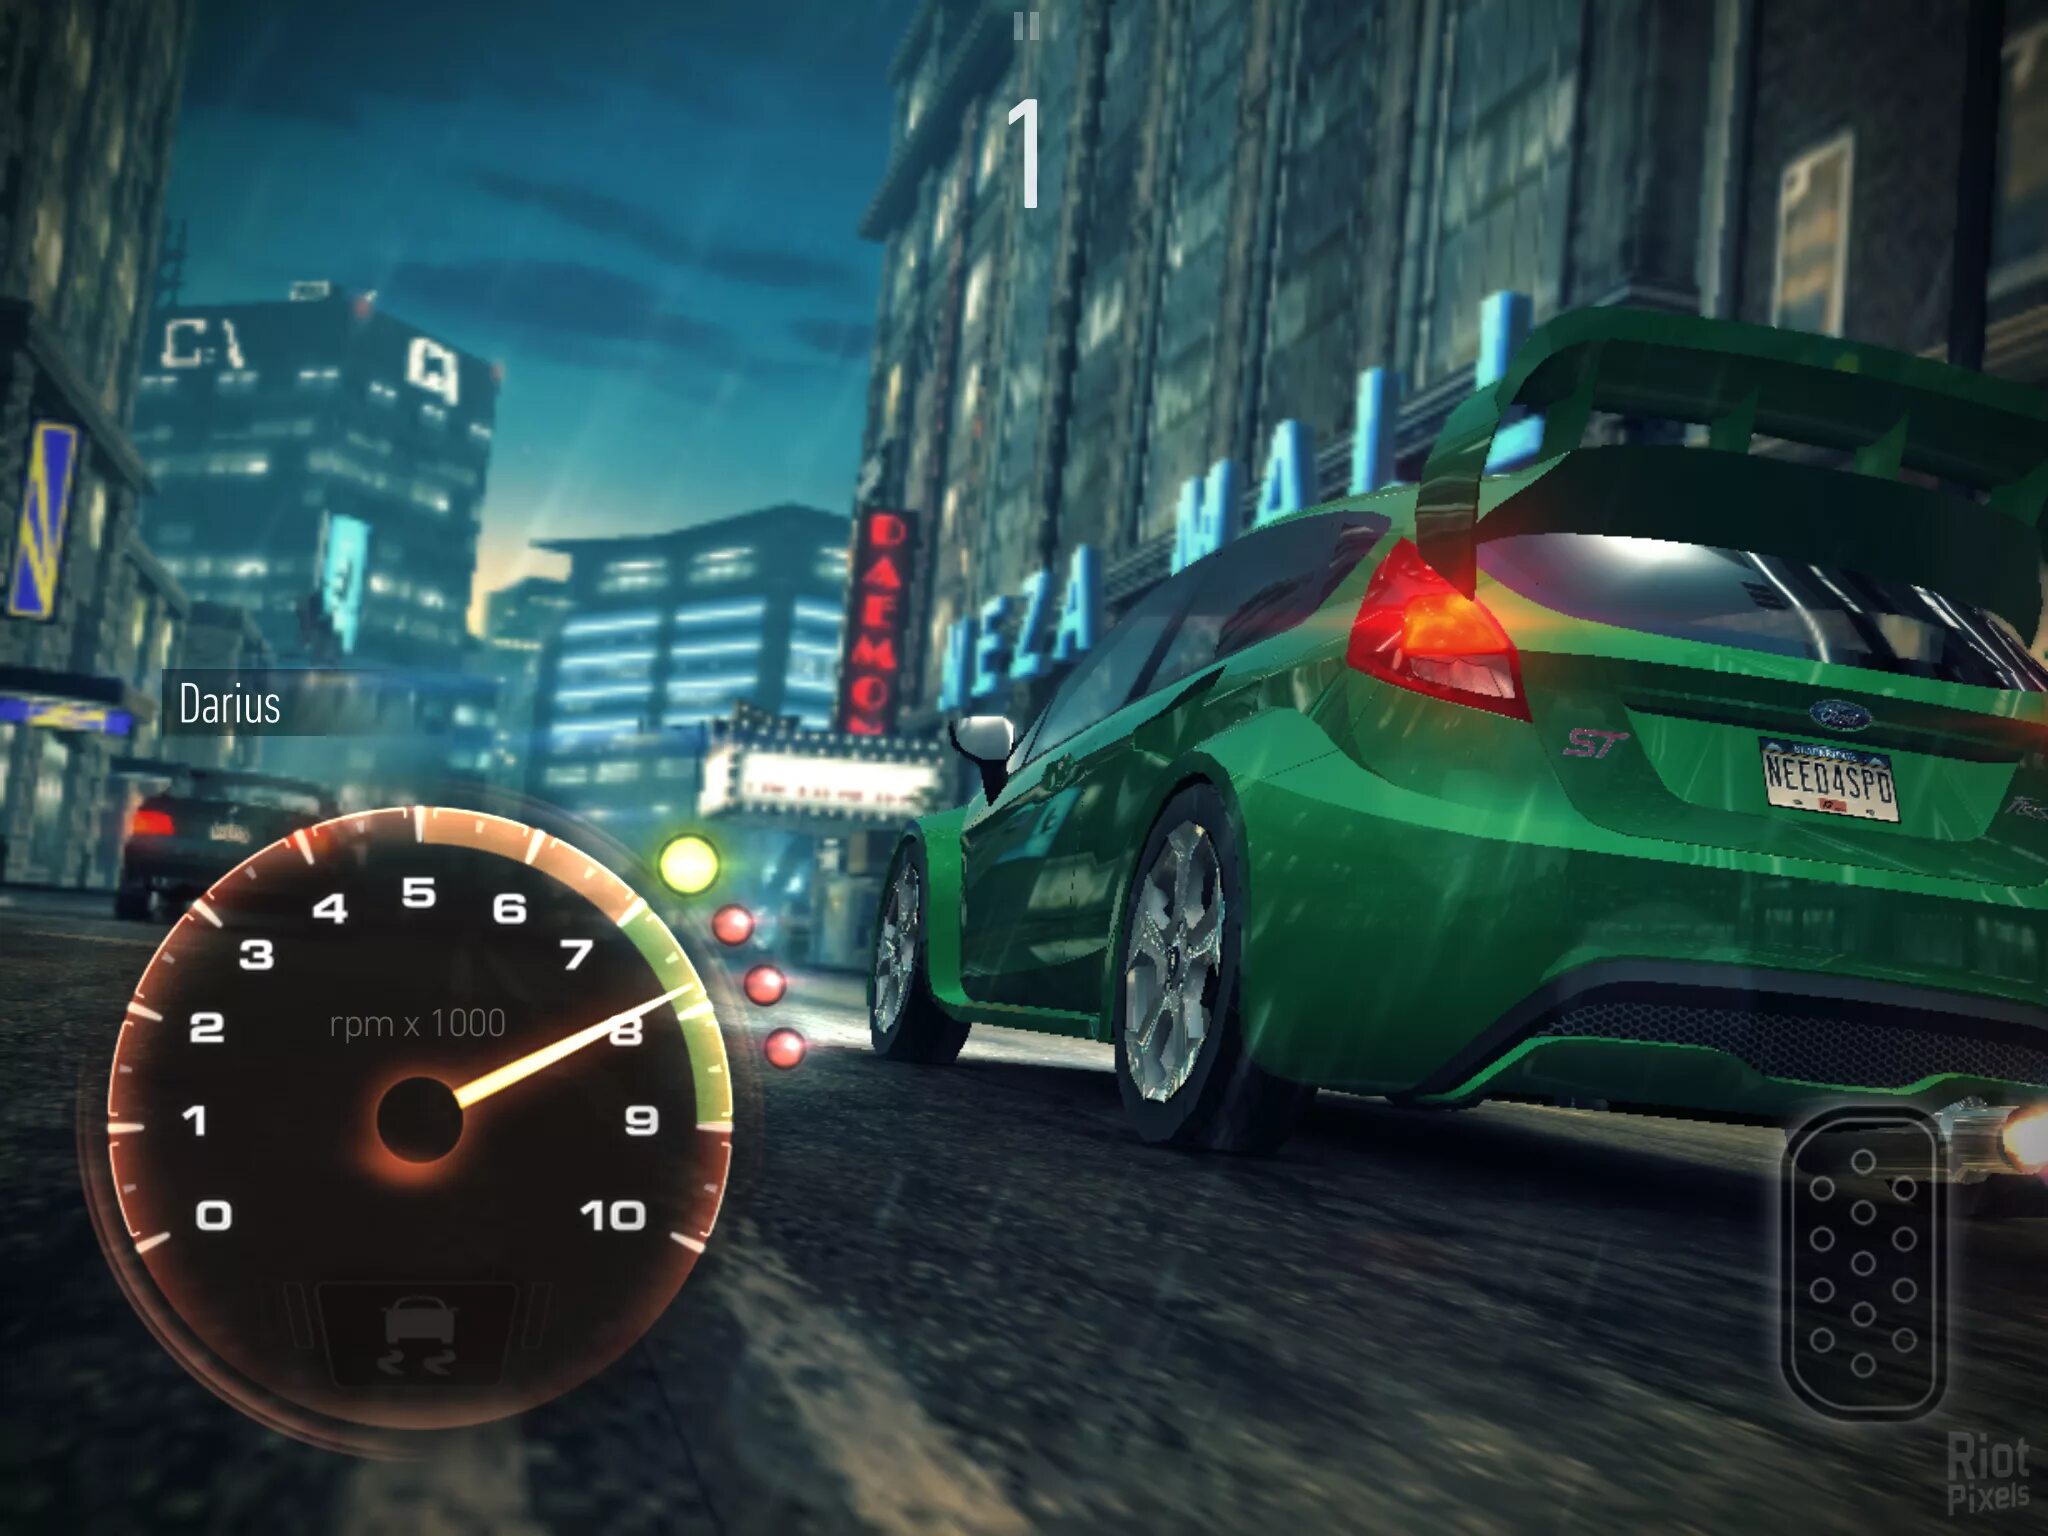 Nfs no limited mod. Need for Speed no limits. Игра NFS no limits. Нфс no limits. Need for Speed nl гонки.